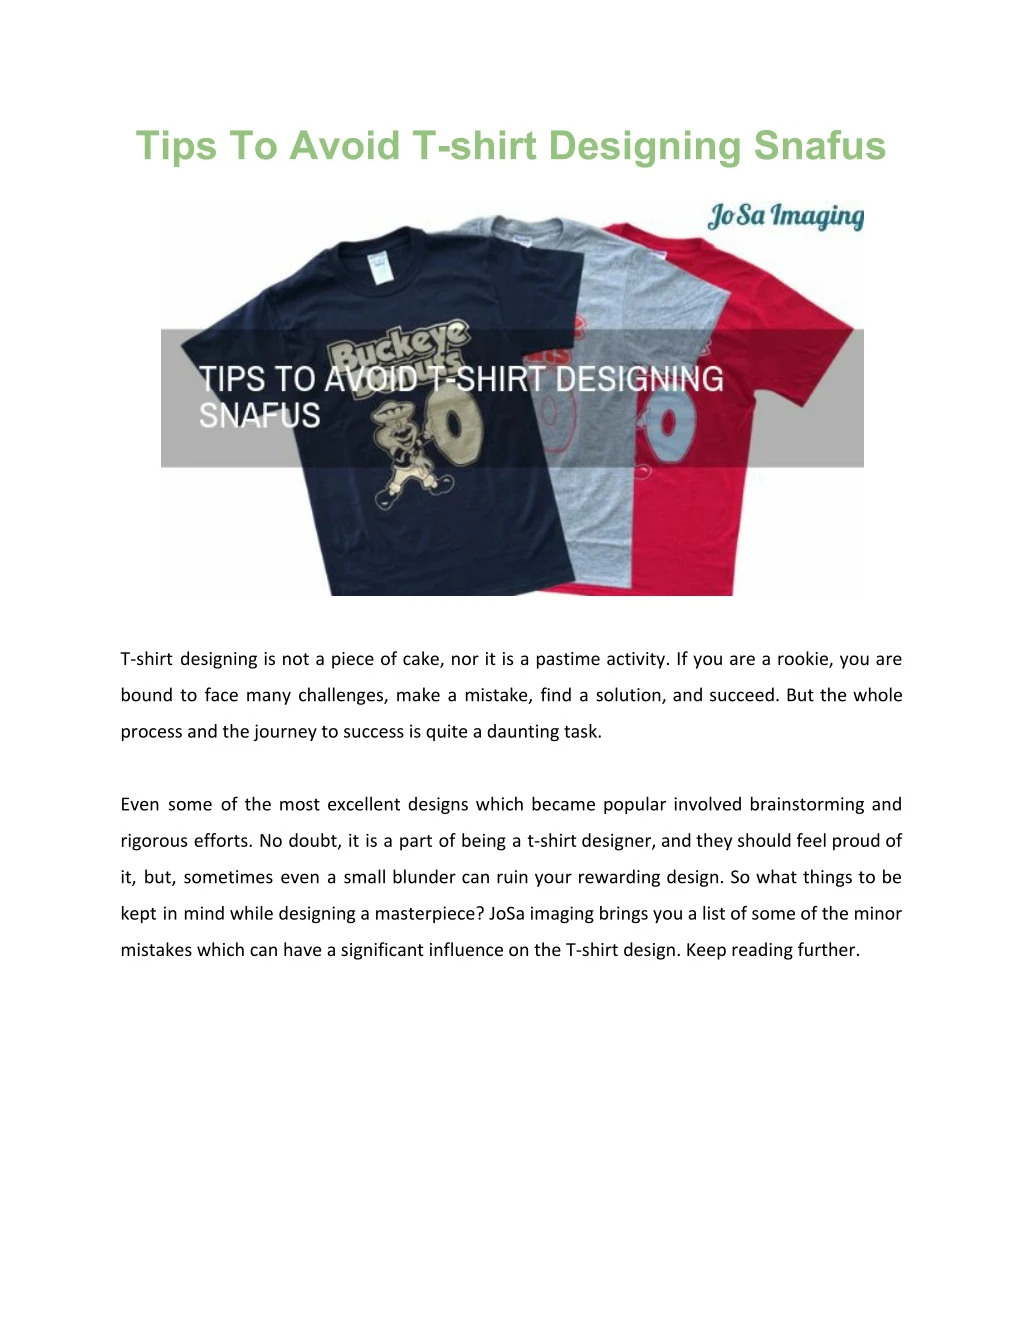 tips to avoid t shirt designing snafus